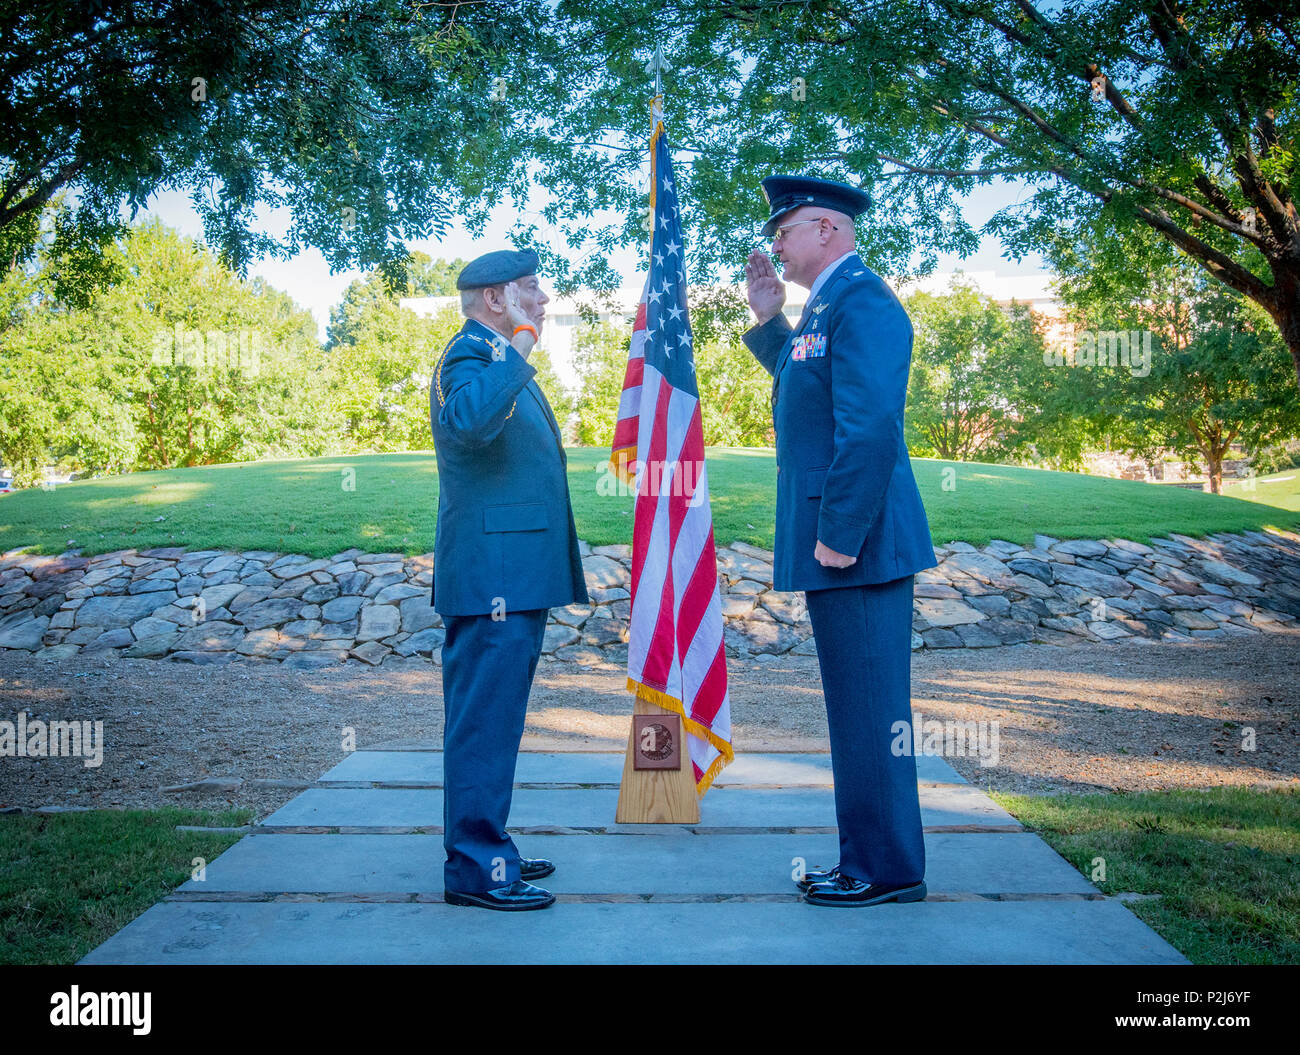 Retired U.S. Air Force Col. Sandy Edge gives the Oath of Office to Lt. Col. Michael E. Mac Lain during Mac Lain’s promotion ceremony at the Scroll of Honor in Clemson University’s Memorial Park, Sept. 30, 2016. Mac Lain is the Aeromedical Operations Flight Commander for the 43rd  Aeromedical Evacuation Squadron, Pope Army Airfield, Fort Bragg, NC. He directs daily flight operations for 60 assigned personnel, and provides medical care as a Flight Nurse on aeromedical evacuation missions. Mac Lain has deployed nine times to combat zones and successfully aero medically evacuated over 700 of the m Stock Photo